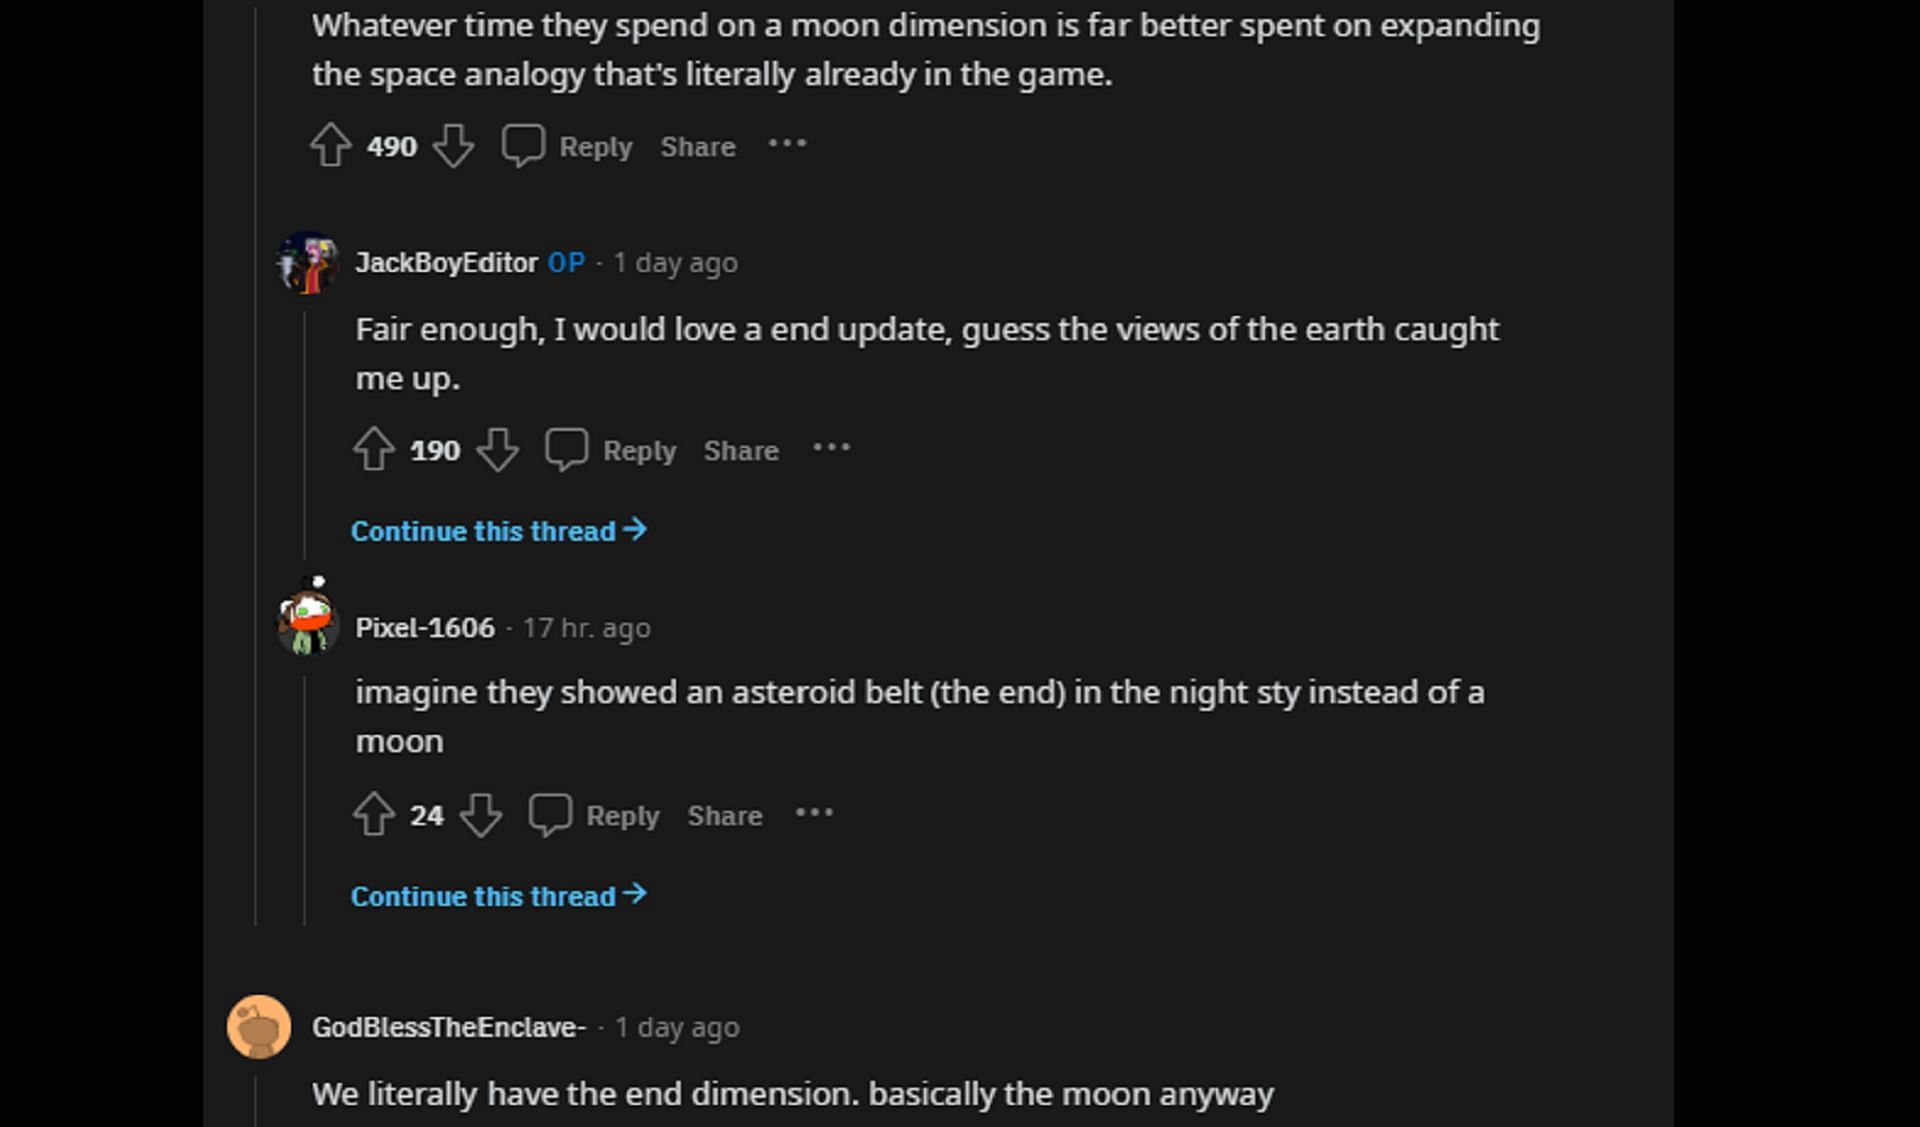 Minecraft fans discuss improving the End instead of creating a moon dimension (Image via u/JackBoyEditor/Reddit)